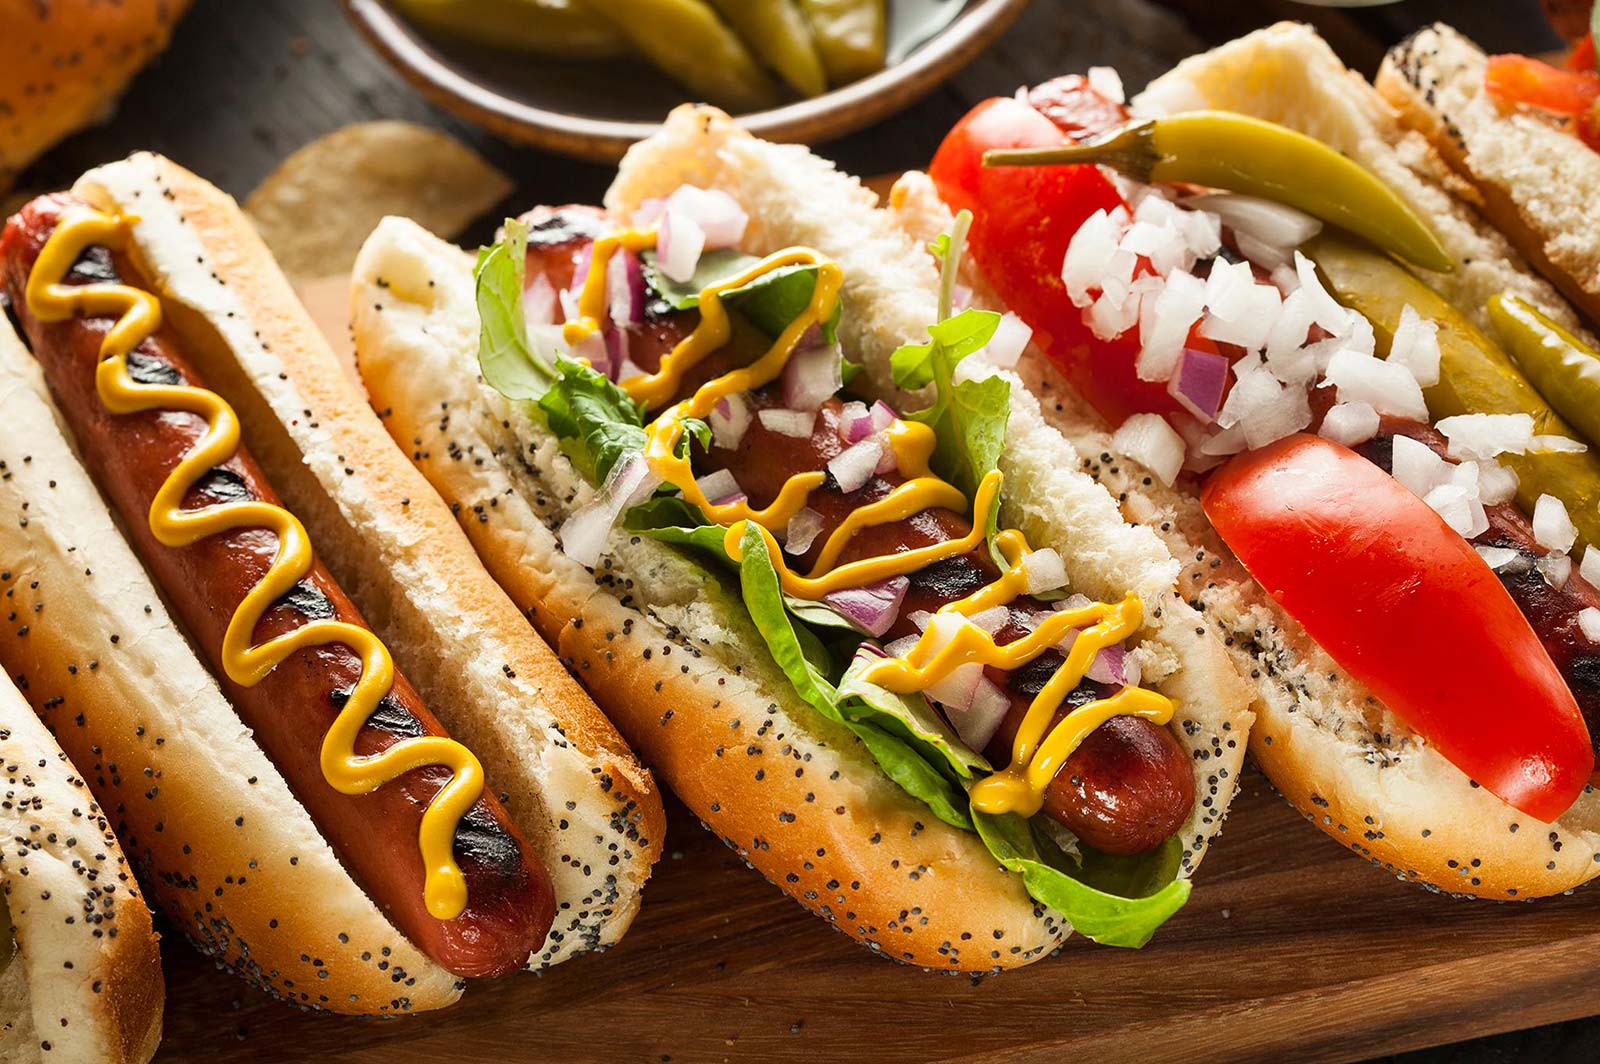 🥩 If You’ve Eaten 14/27 of These Meats, You’re Definitely a Carnivore Hot Dog